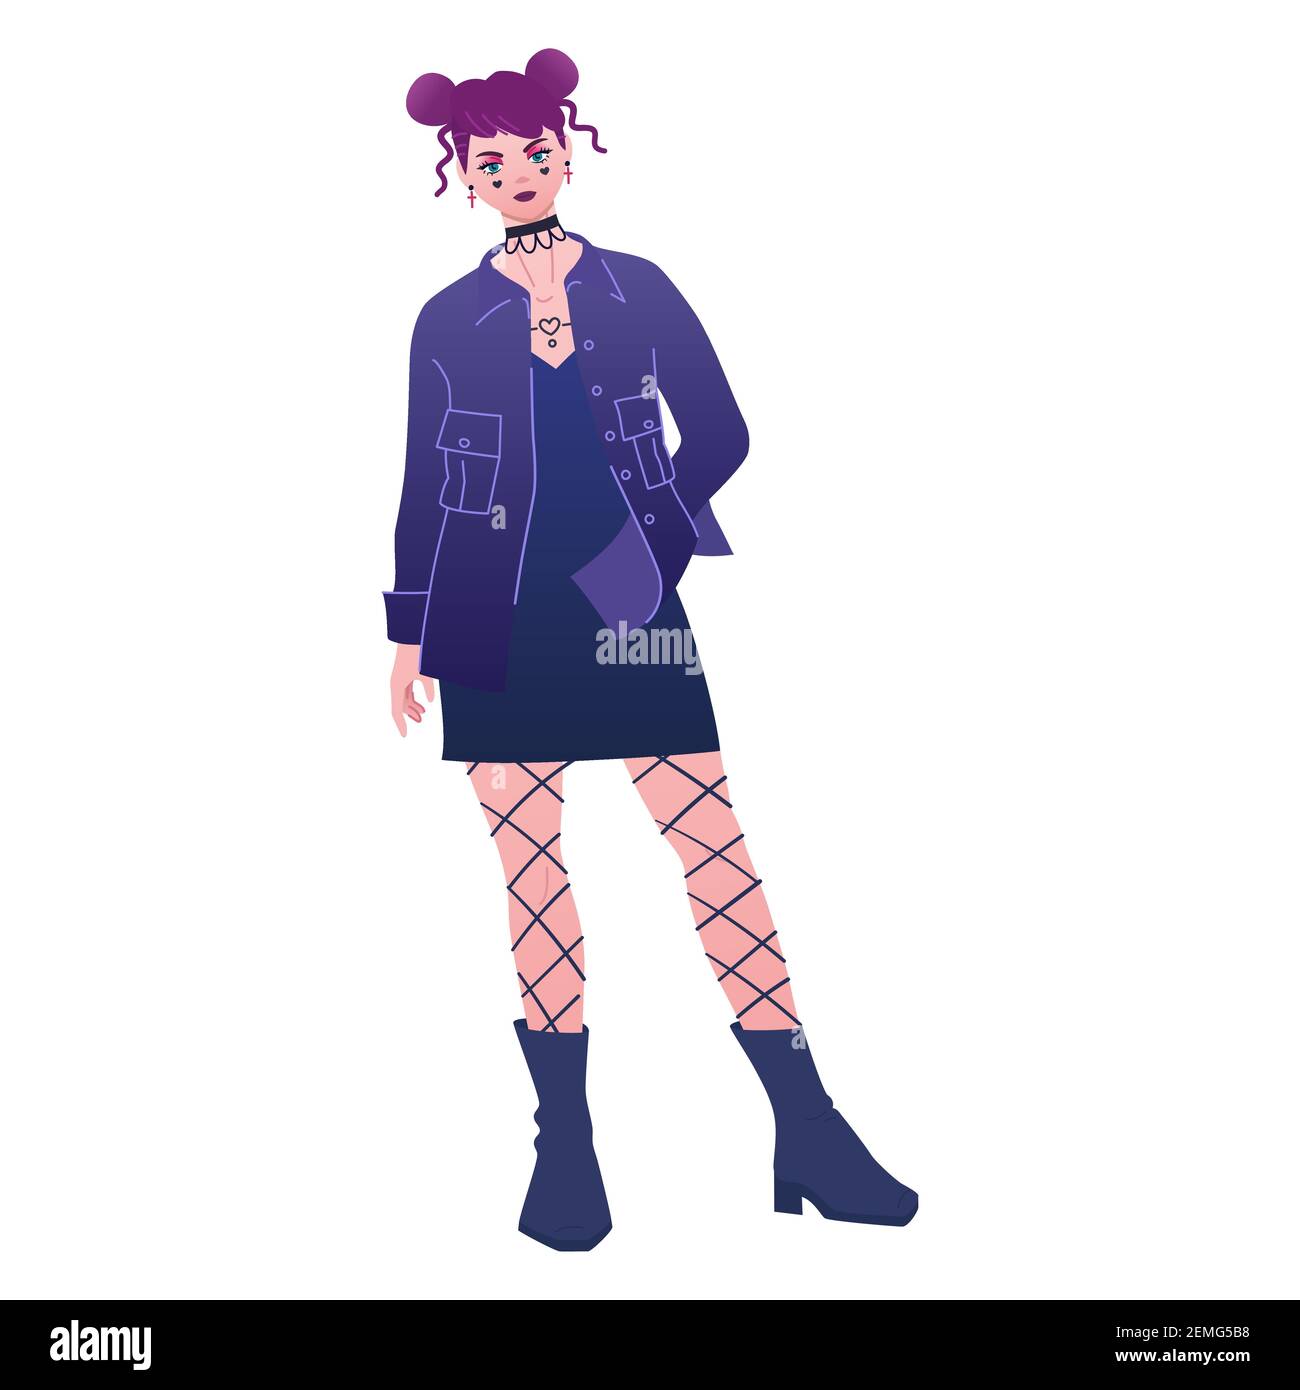 E-girl wears trendy outfit. Punk fashion dark look, new emo style. Young girl in modern outfit with odango hair, short slip dress and shirt jacket Stock Vector